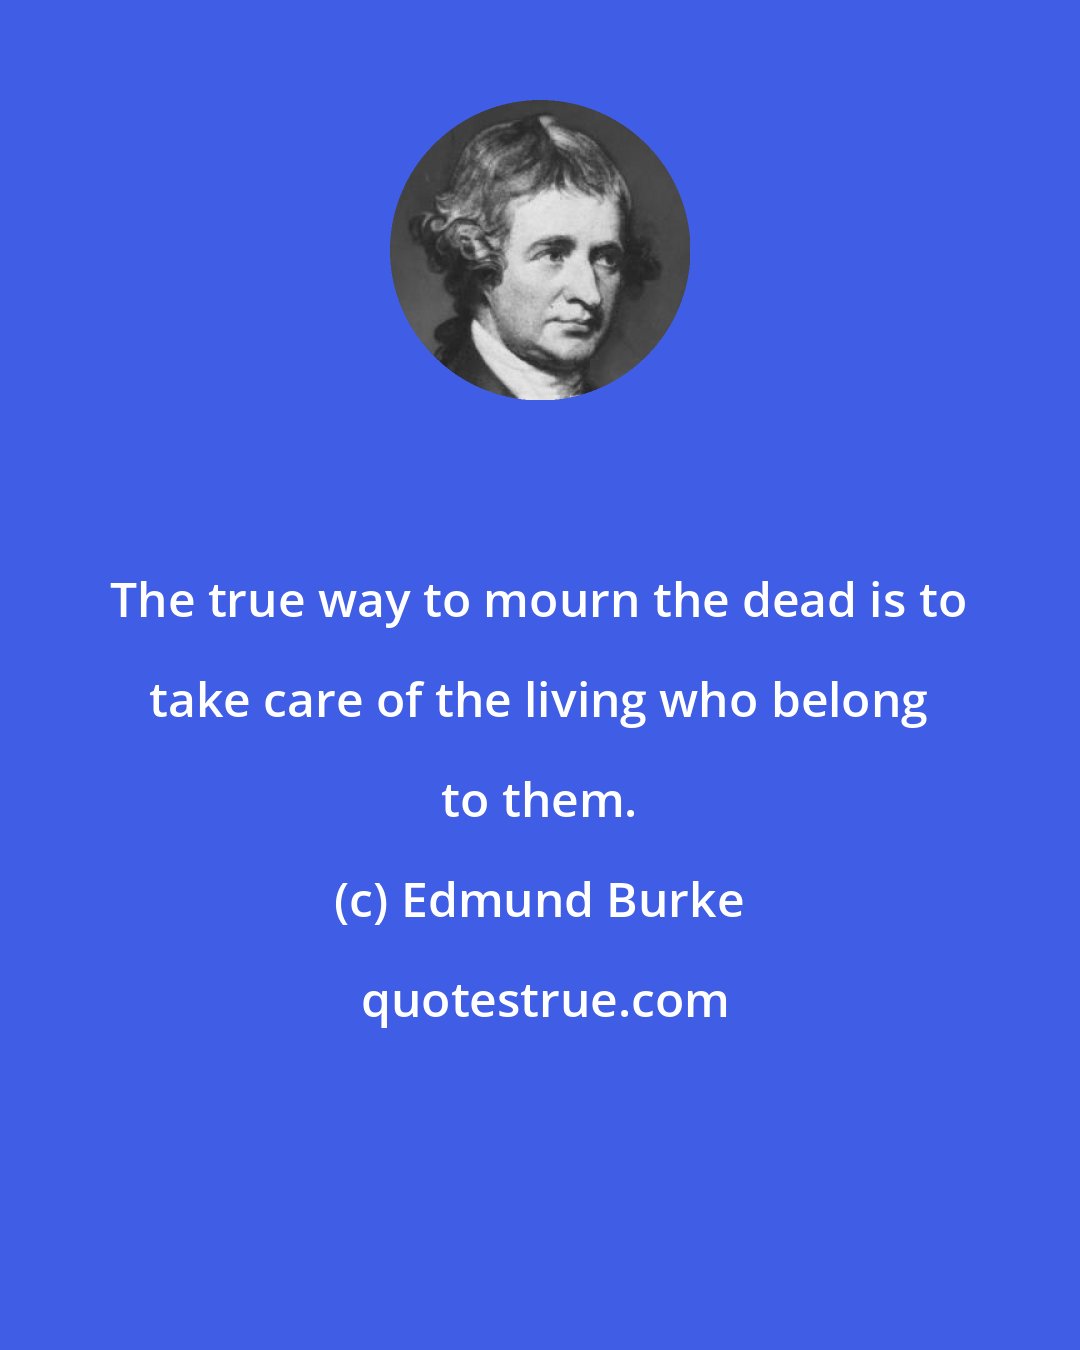 Edmund Burke: The true way to mourn the dead is to take care of the living who belong to them.